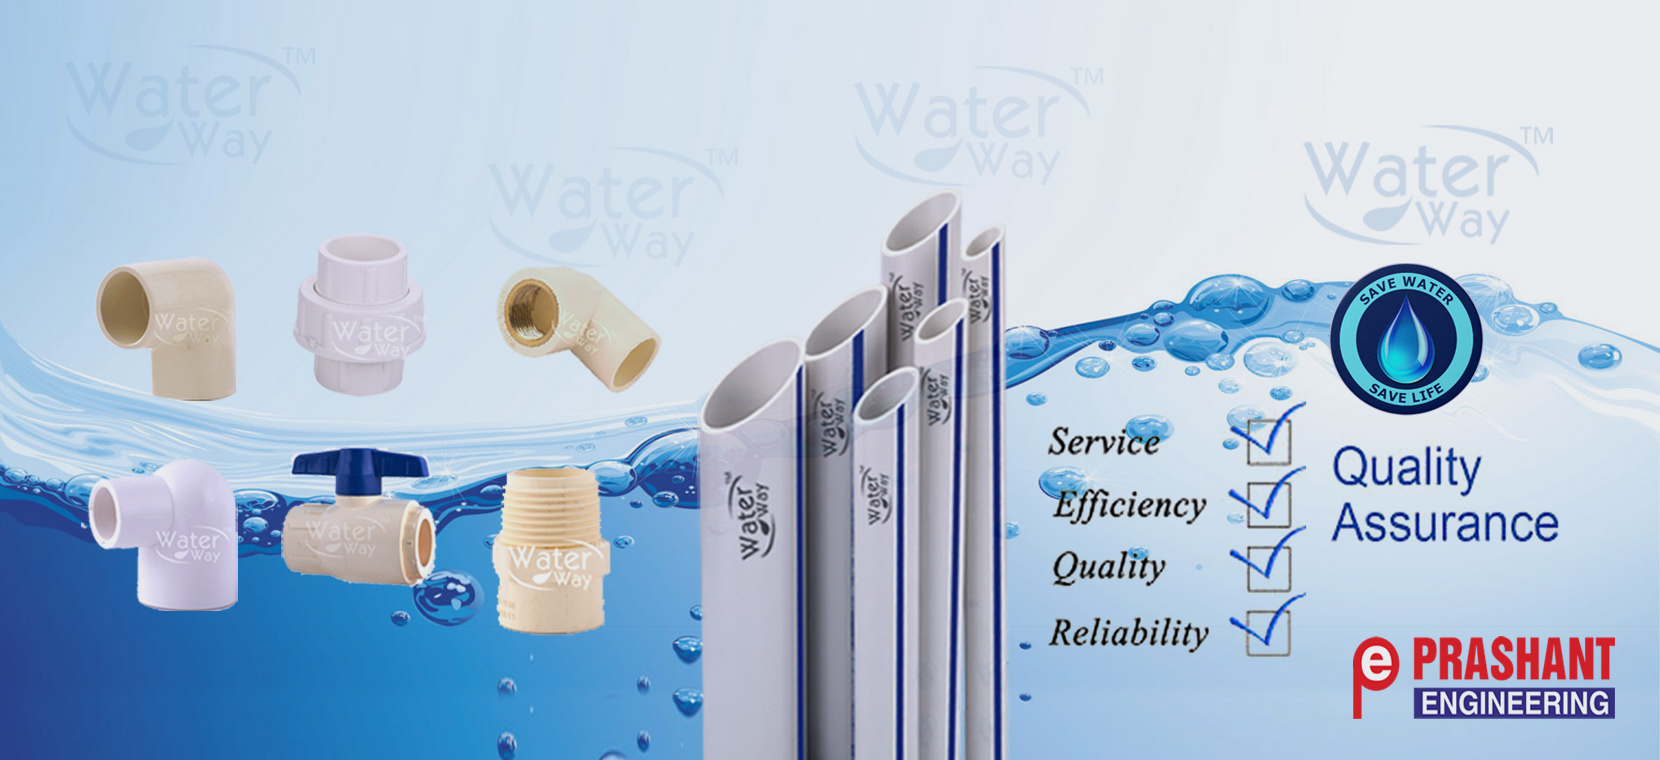 CPVC -UPVC Water Way Pipe Fitting Manufacturers Supplier - Water Way Pipeline Fitting - CPVC -UPVC Water Way Pipe Fitting Manufacturers Supplier - Water Way Pipeline Fitting